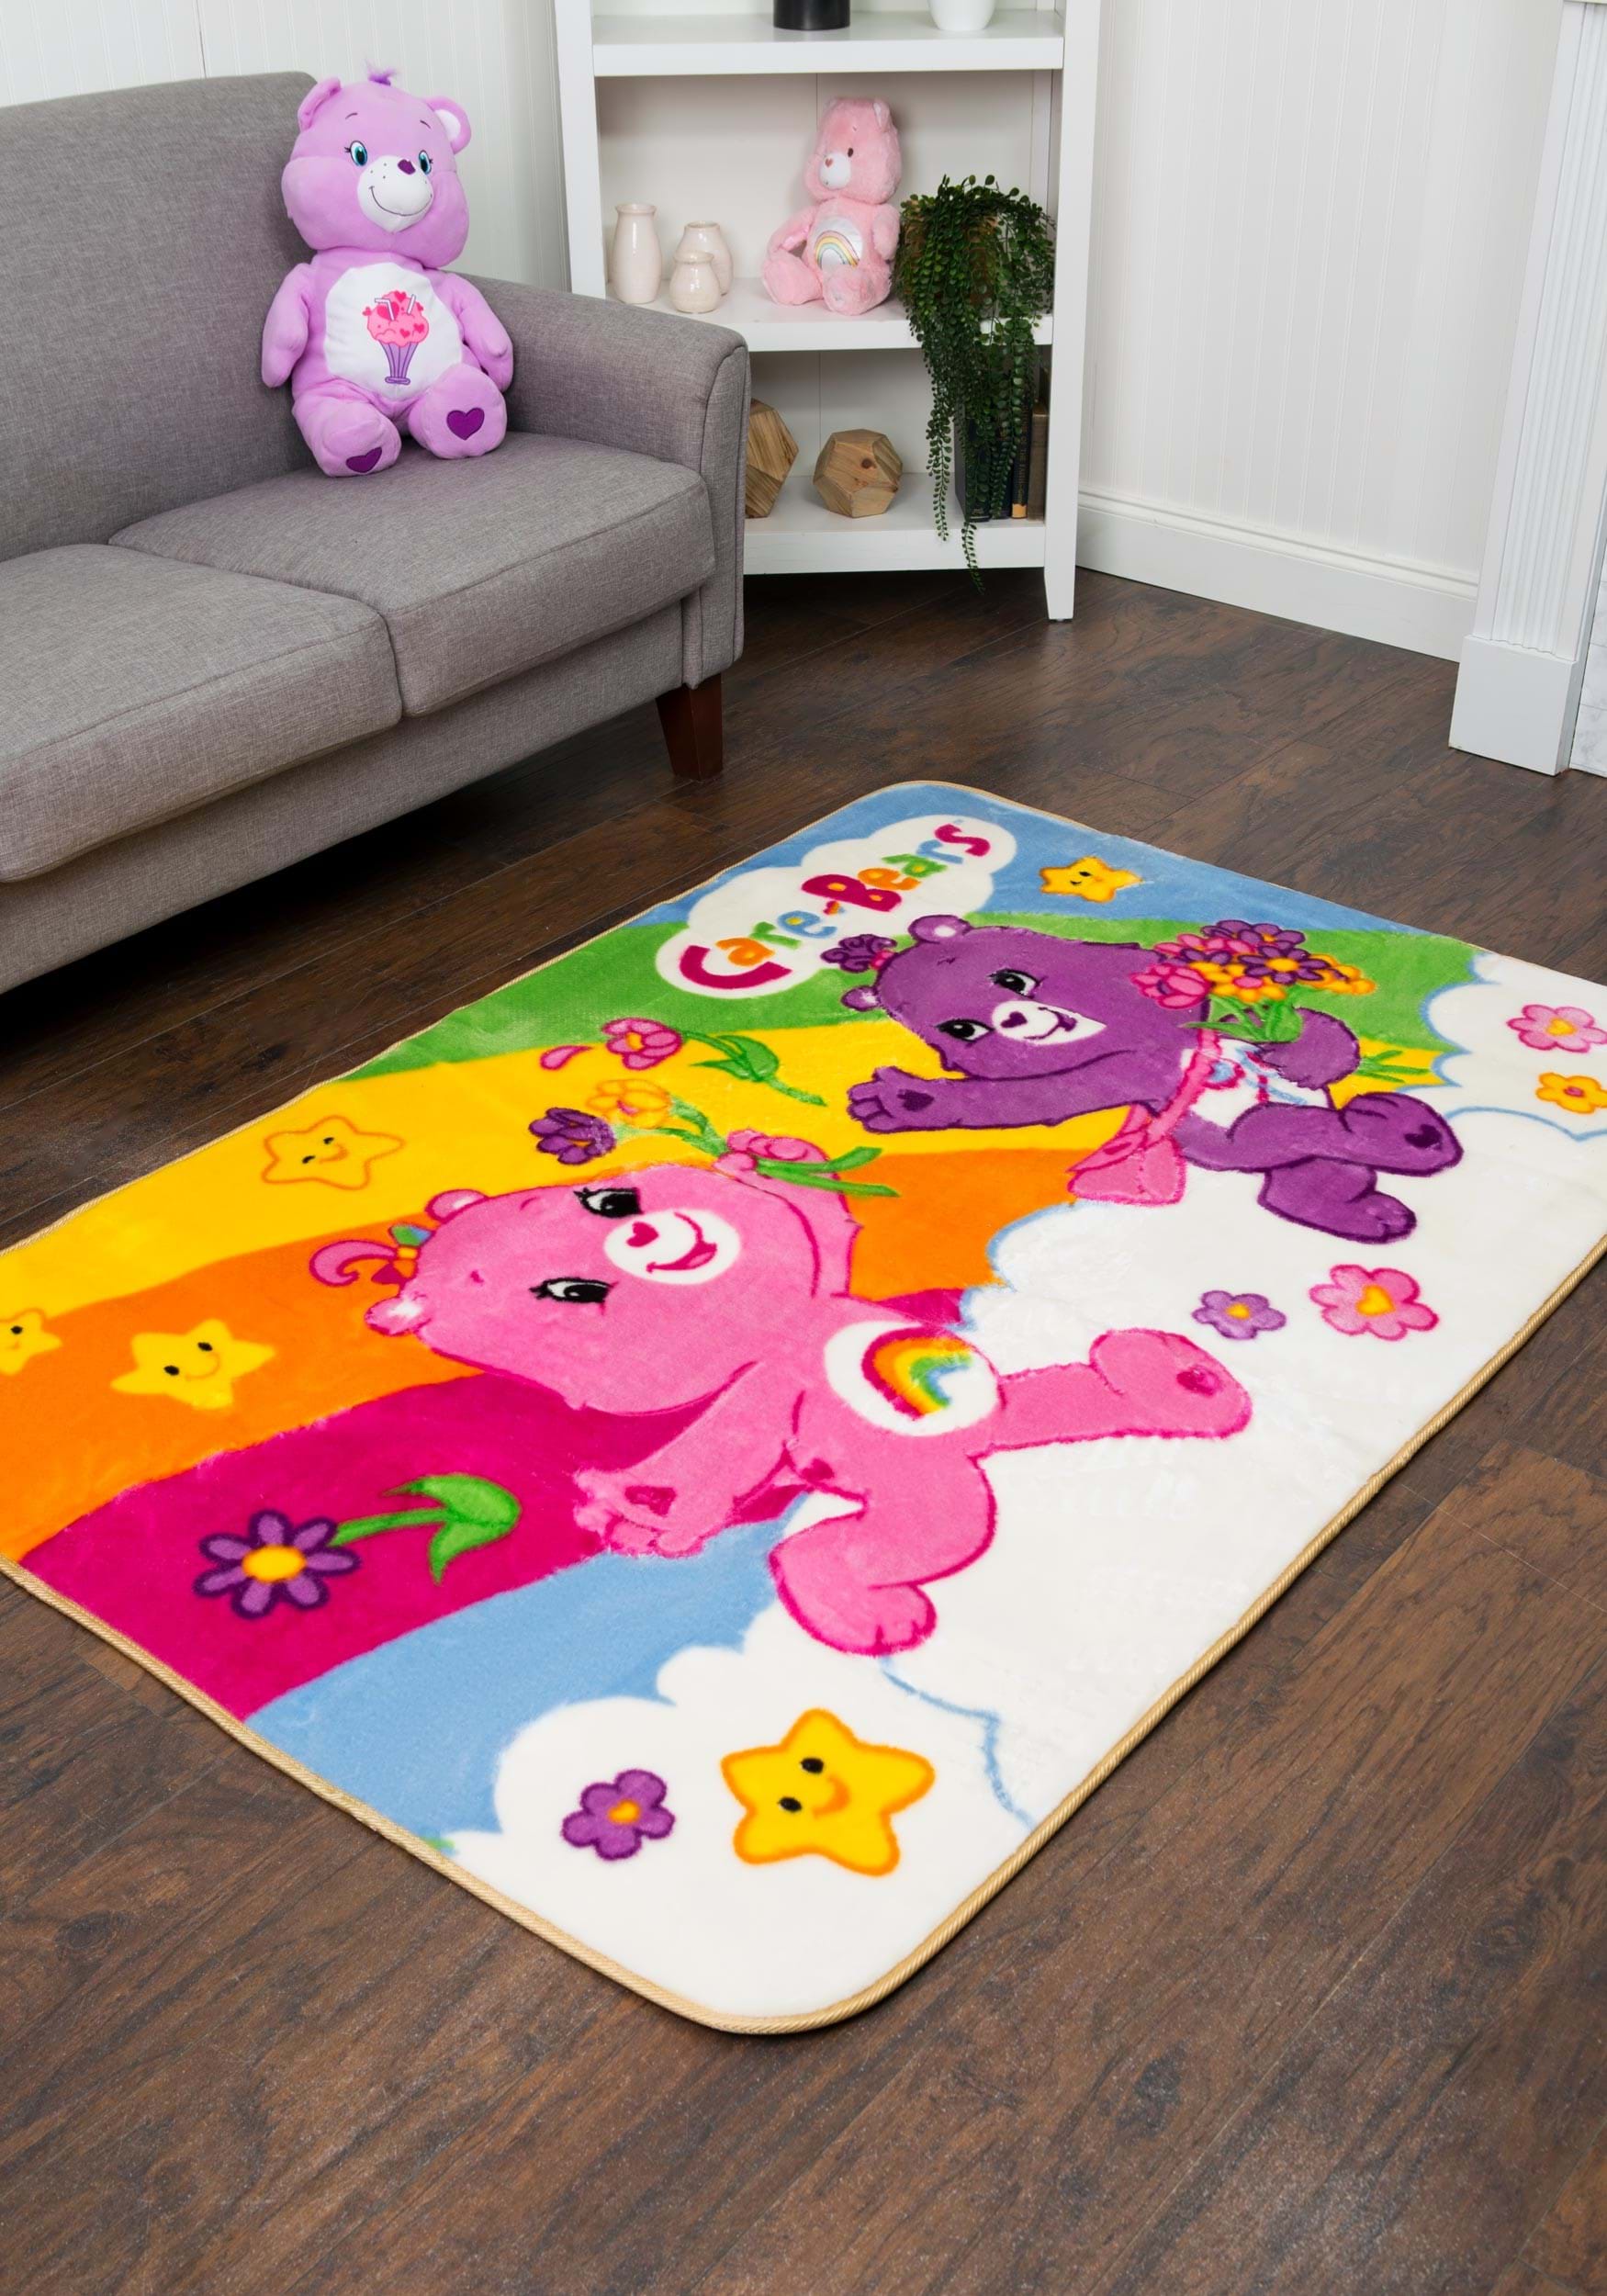 pink care bear with rainbow